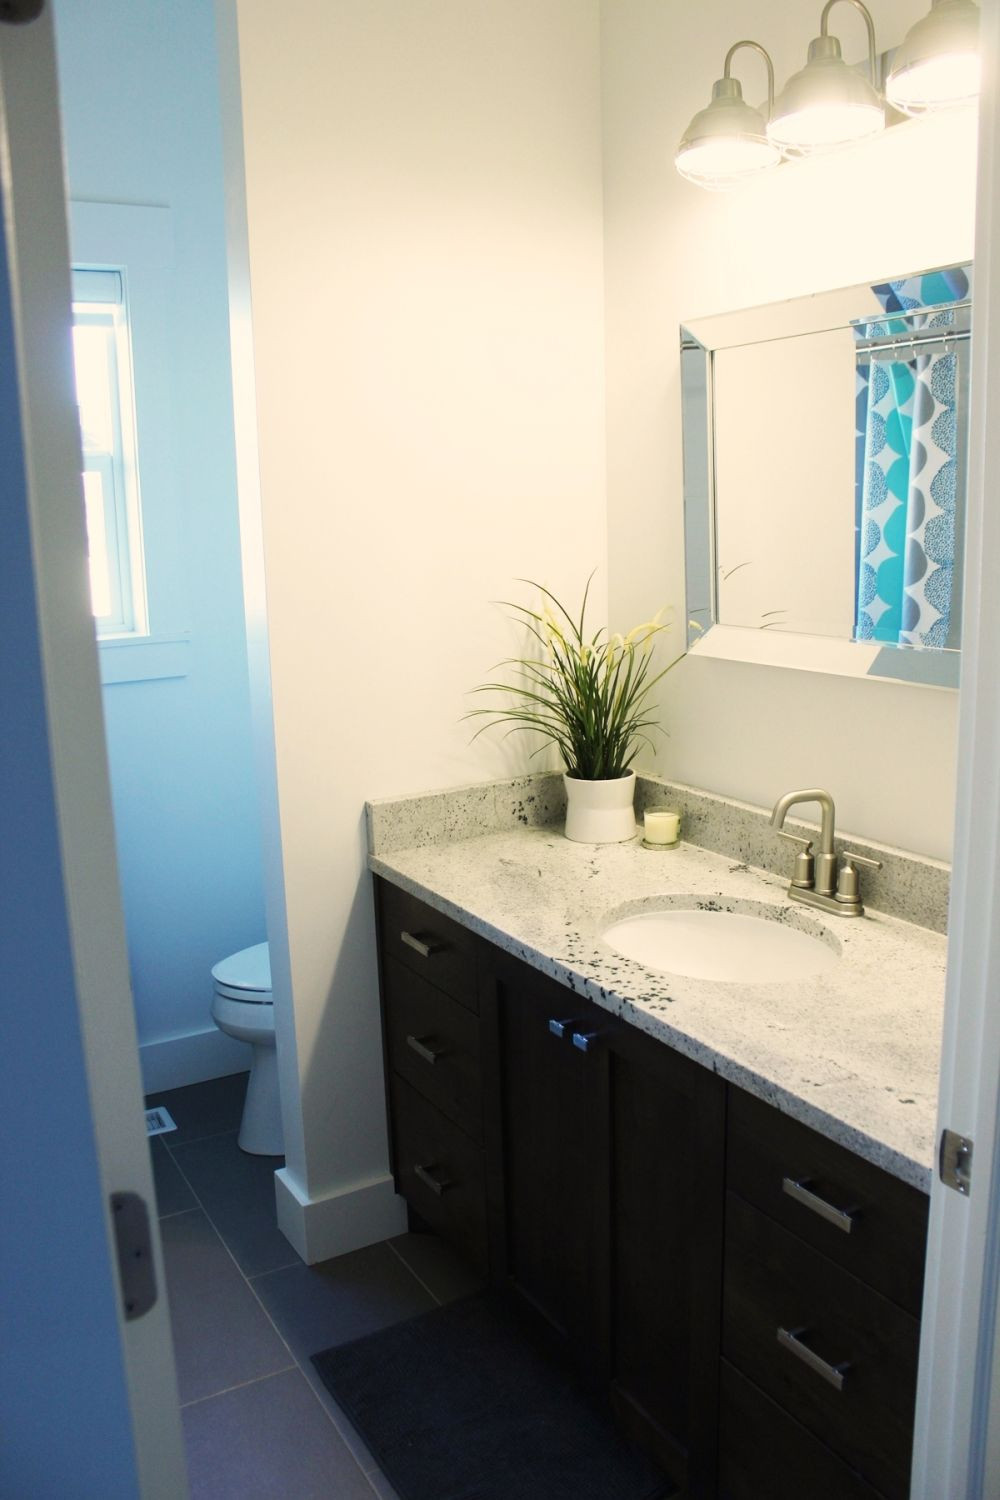 Small Bathroom Decorating
 How to Decorate a Bathroom Without Clutter